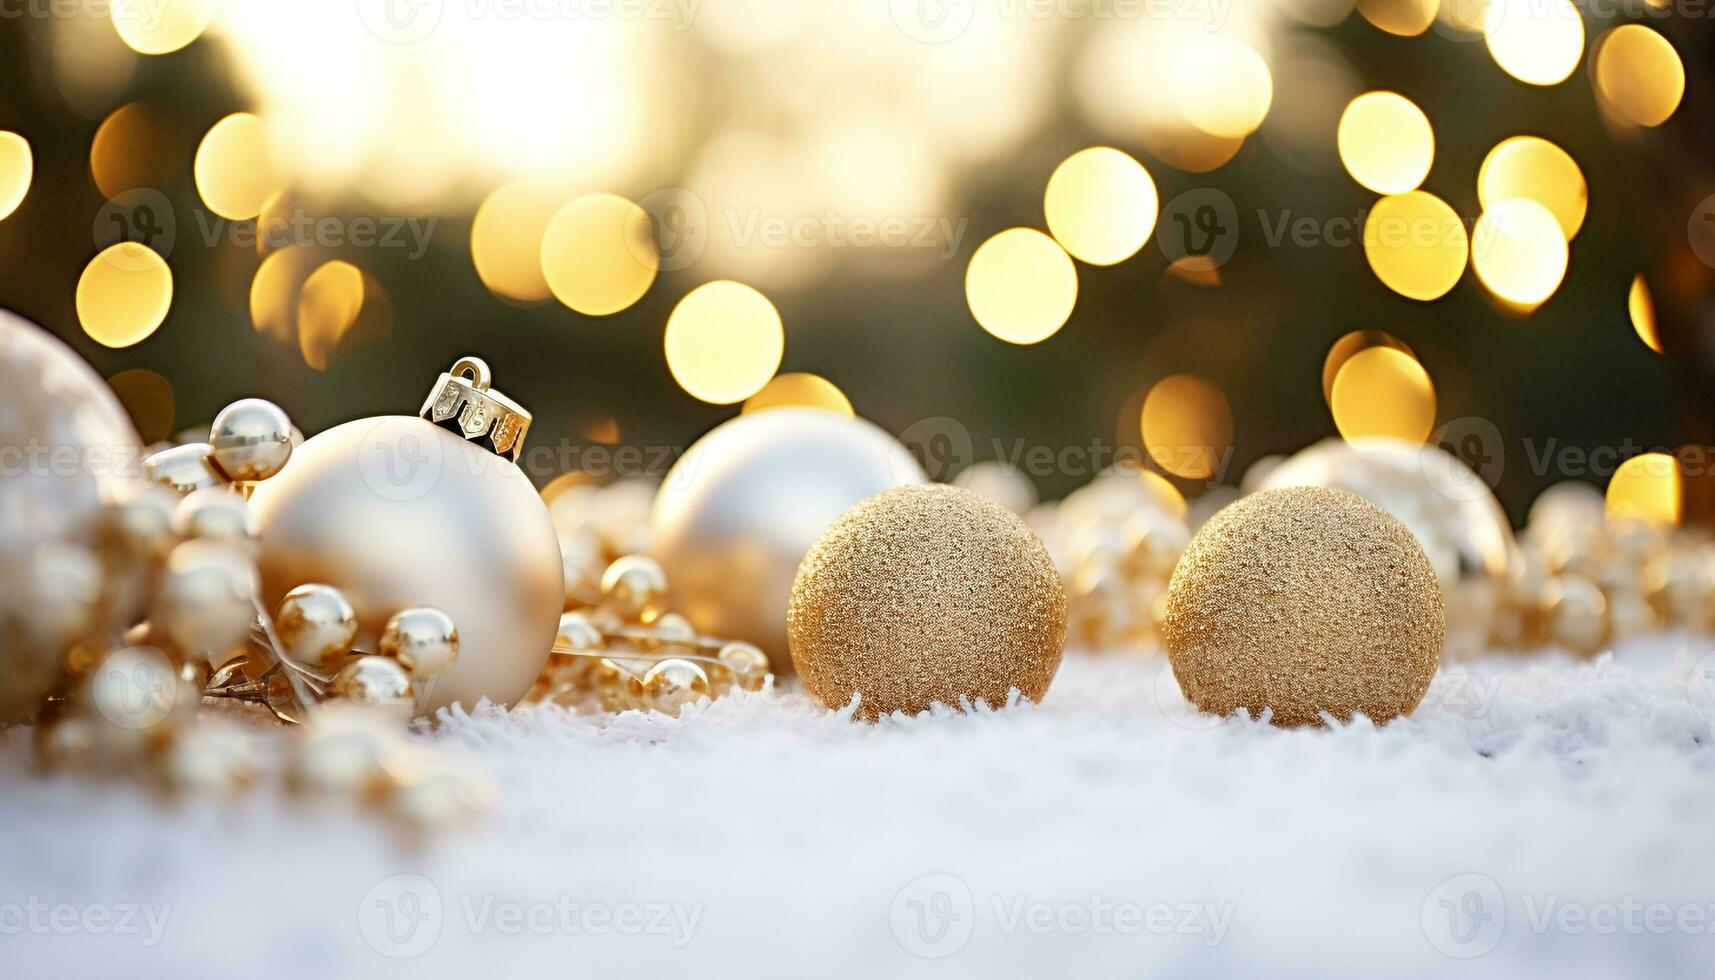 AI generated Snowflake glowing on gold ornament, winter celebration generated by AI photo